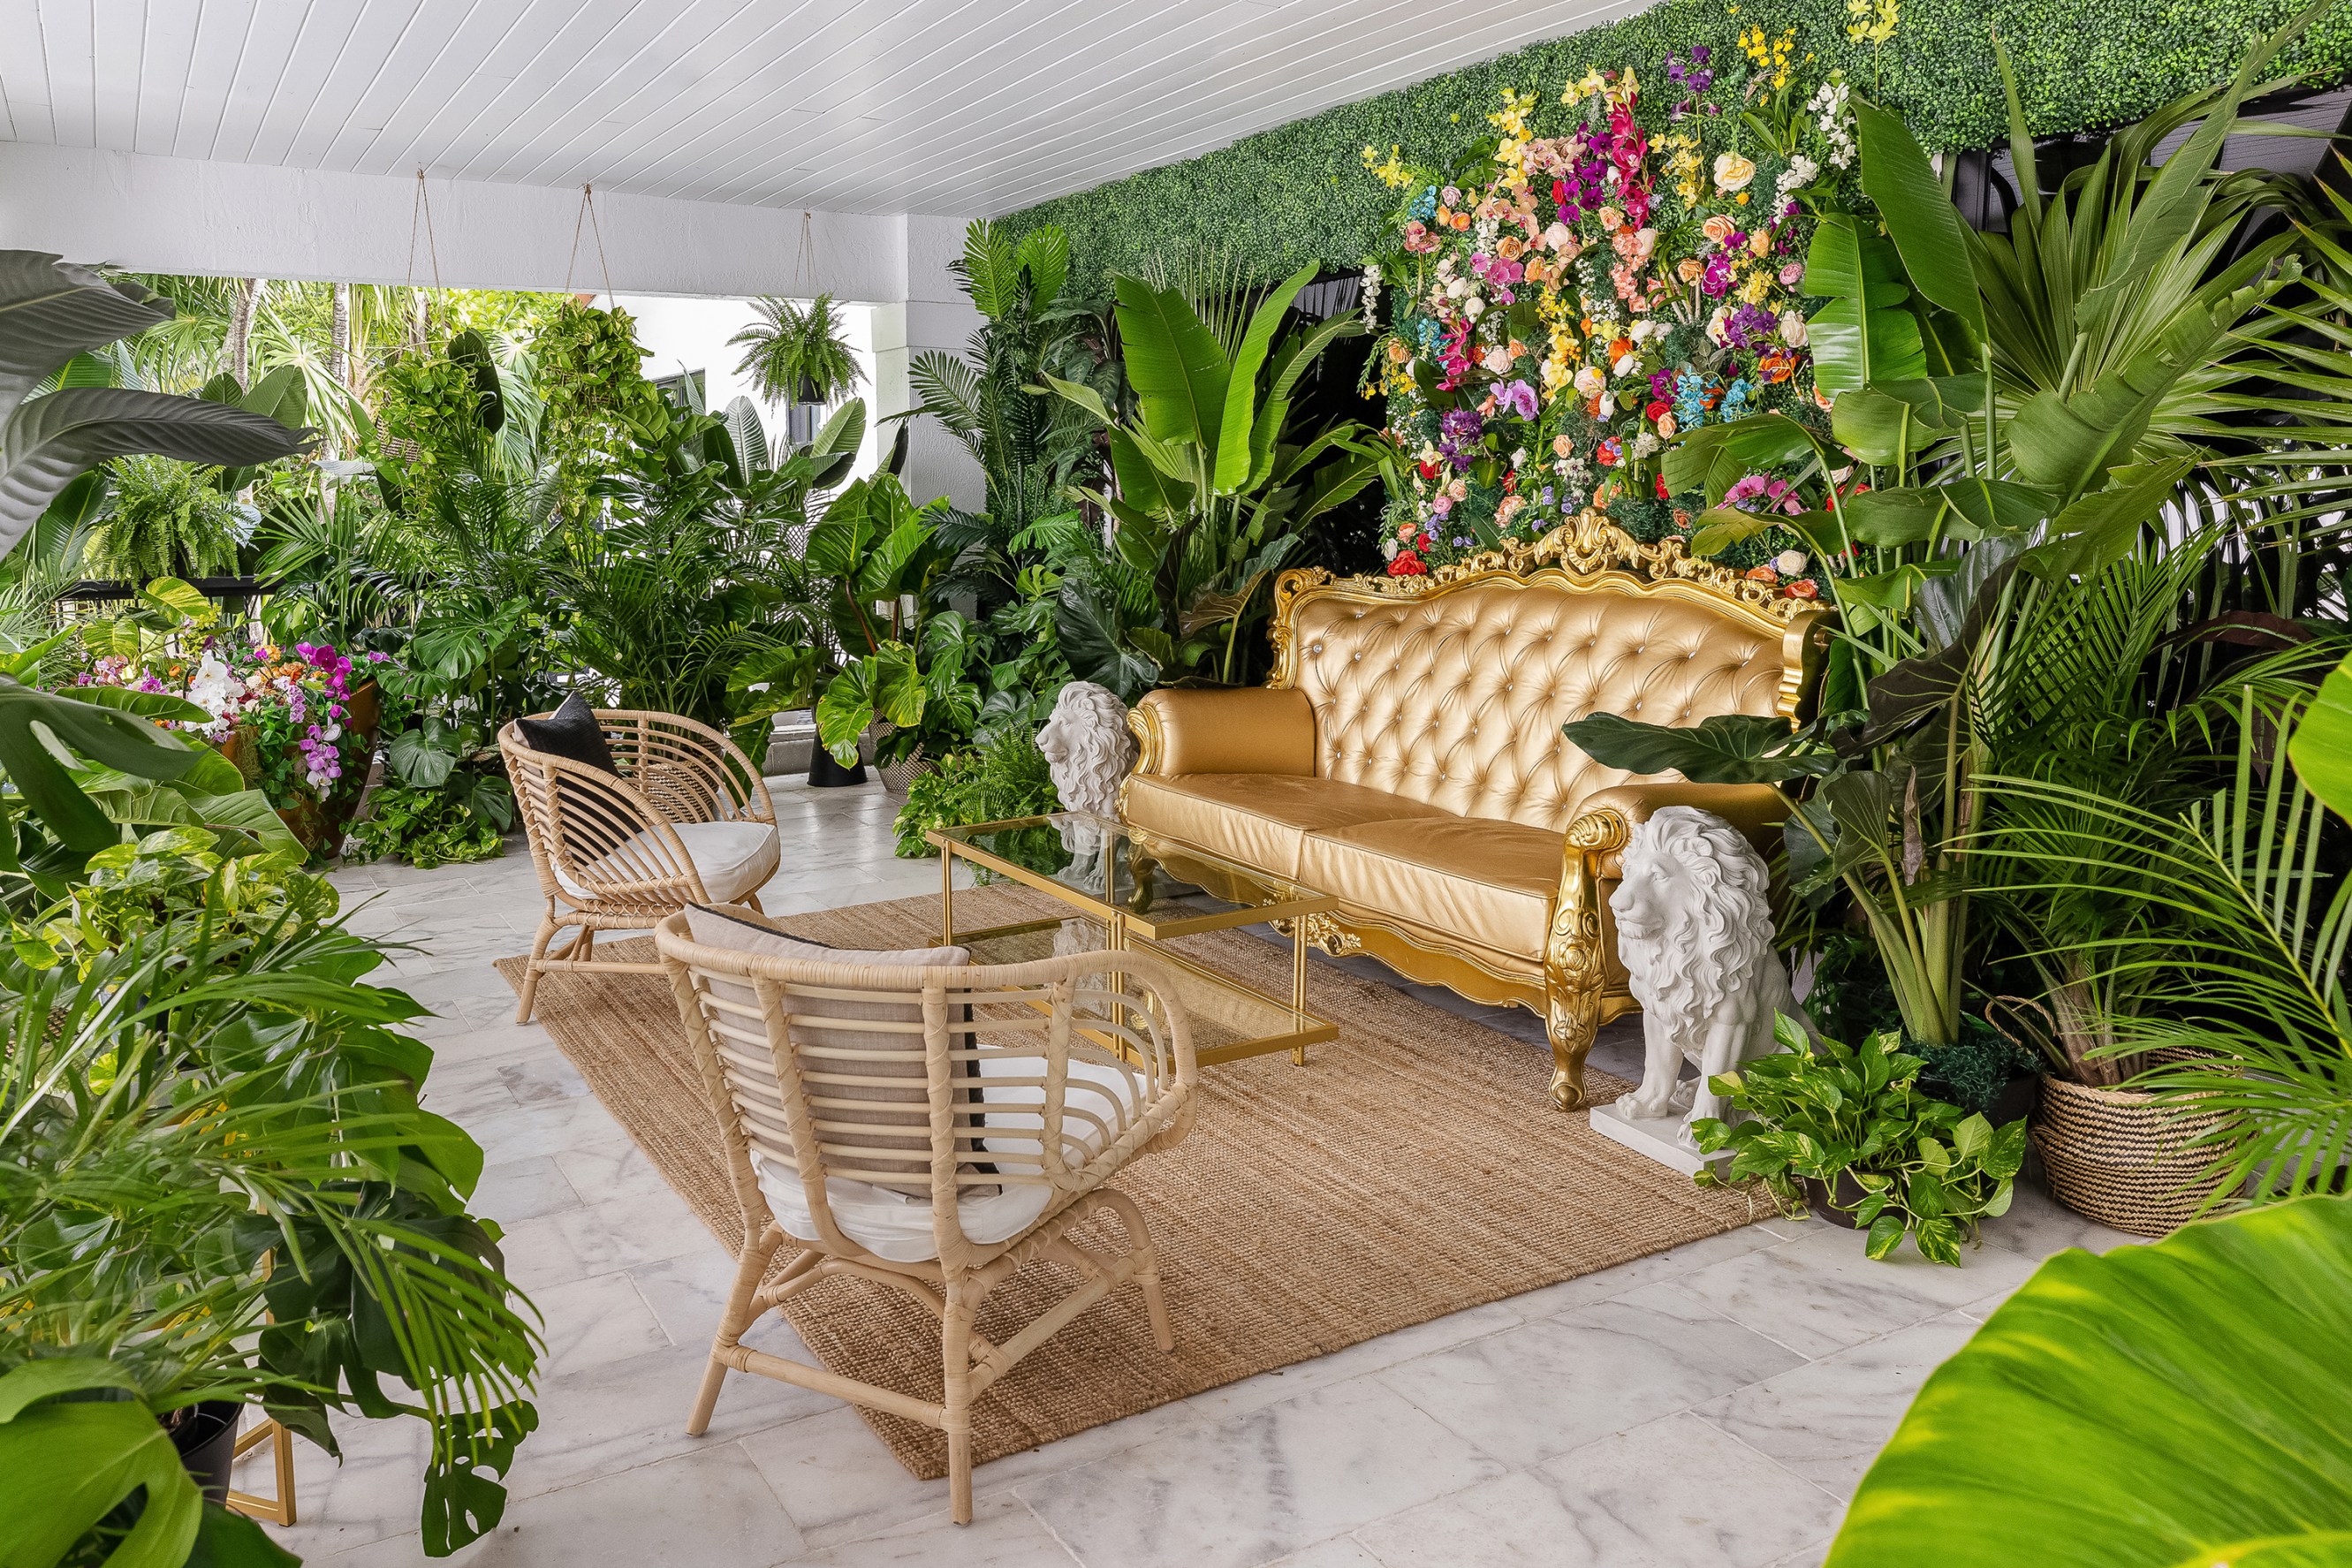 An outdoor seating vignette showing a gold plush sofa and two arm chairs facing it, with a floral wall backdrop surrounded by lush green plants.